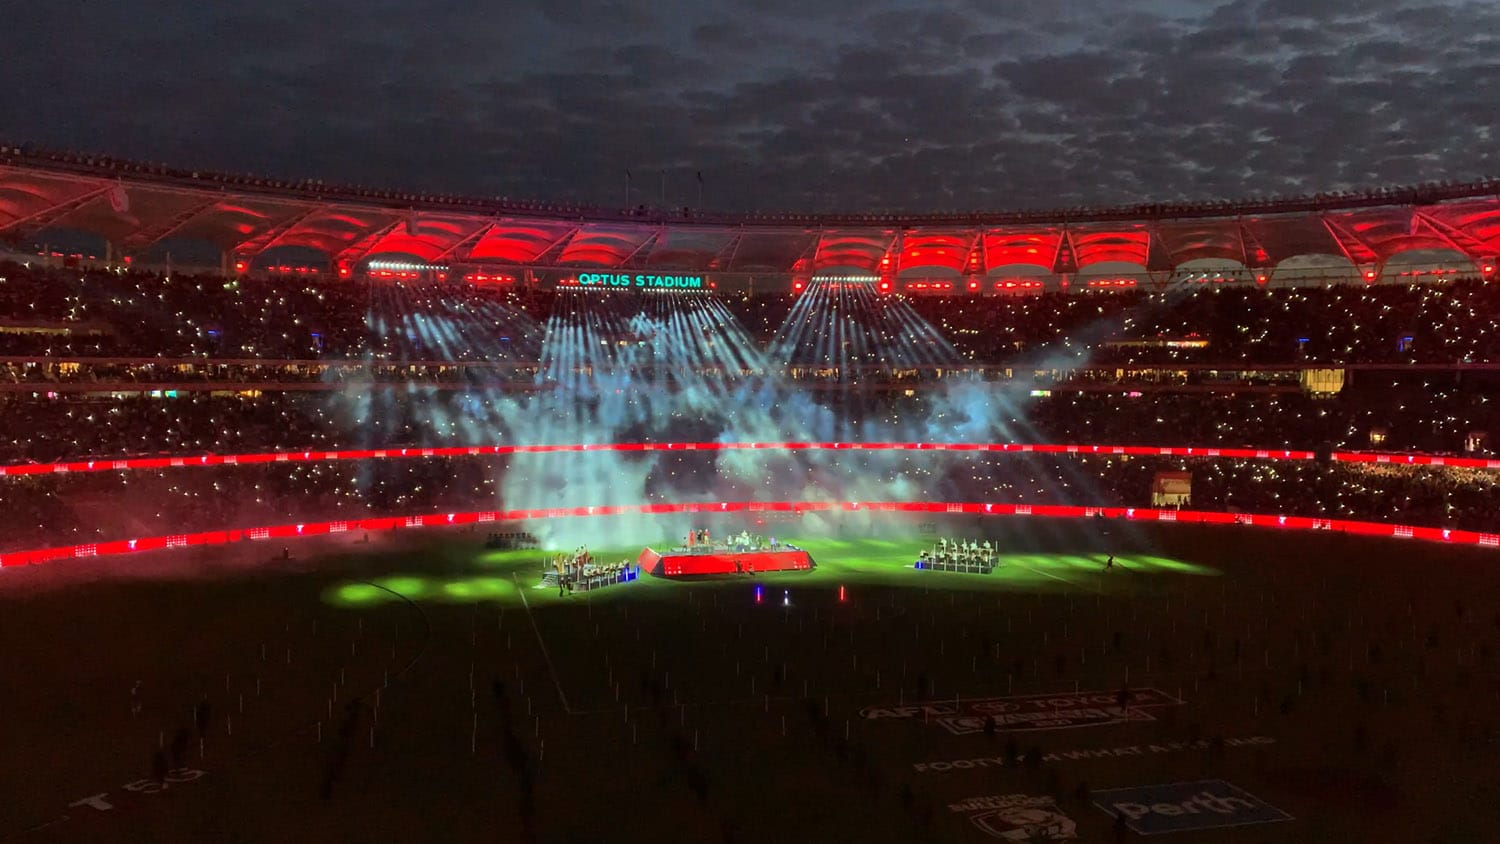 Some 61,000 fans packed the stadium in Perth for the AFL Grand Final.